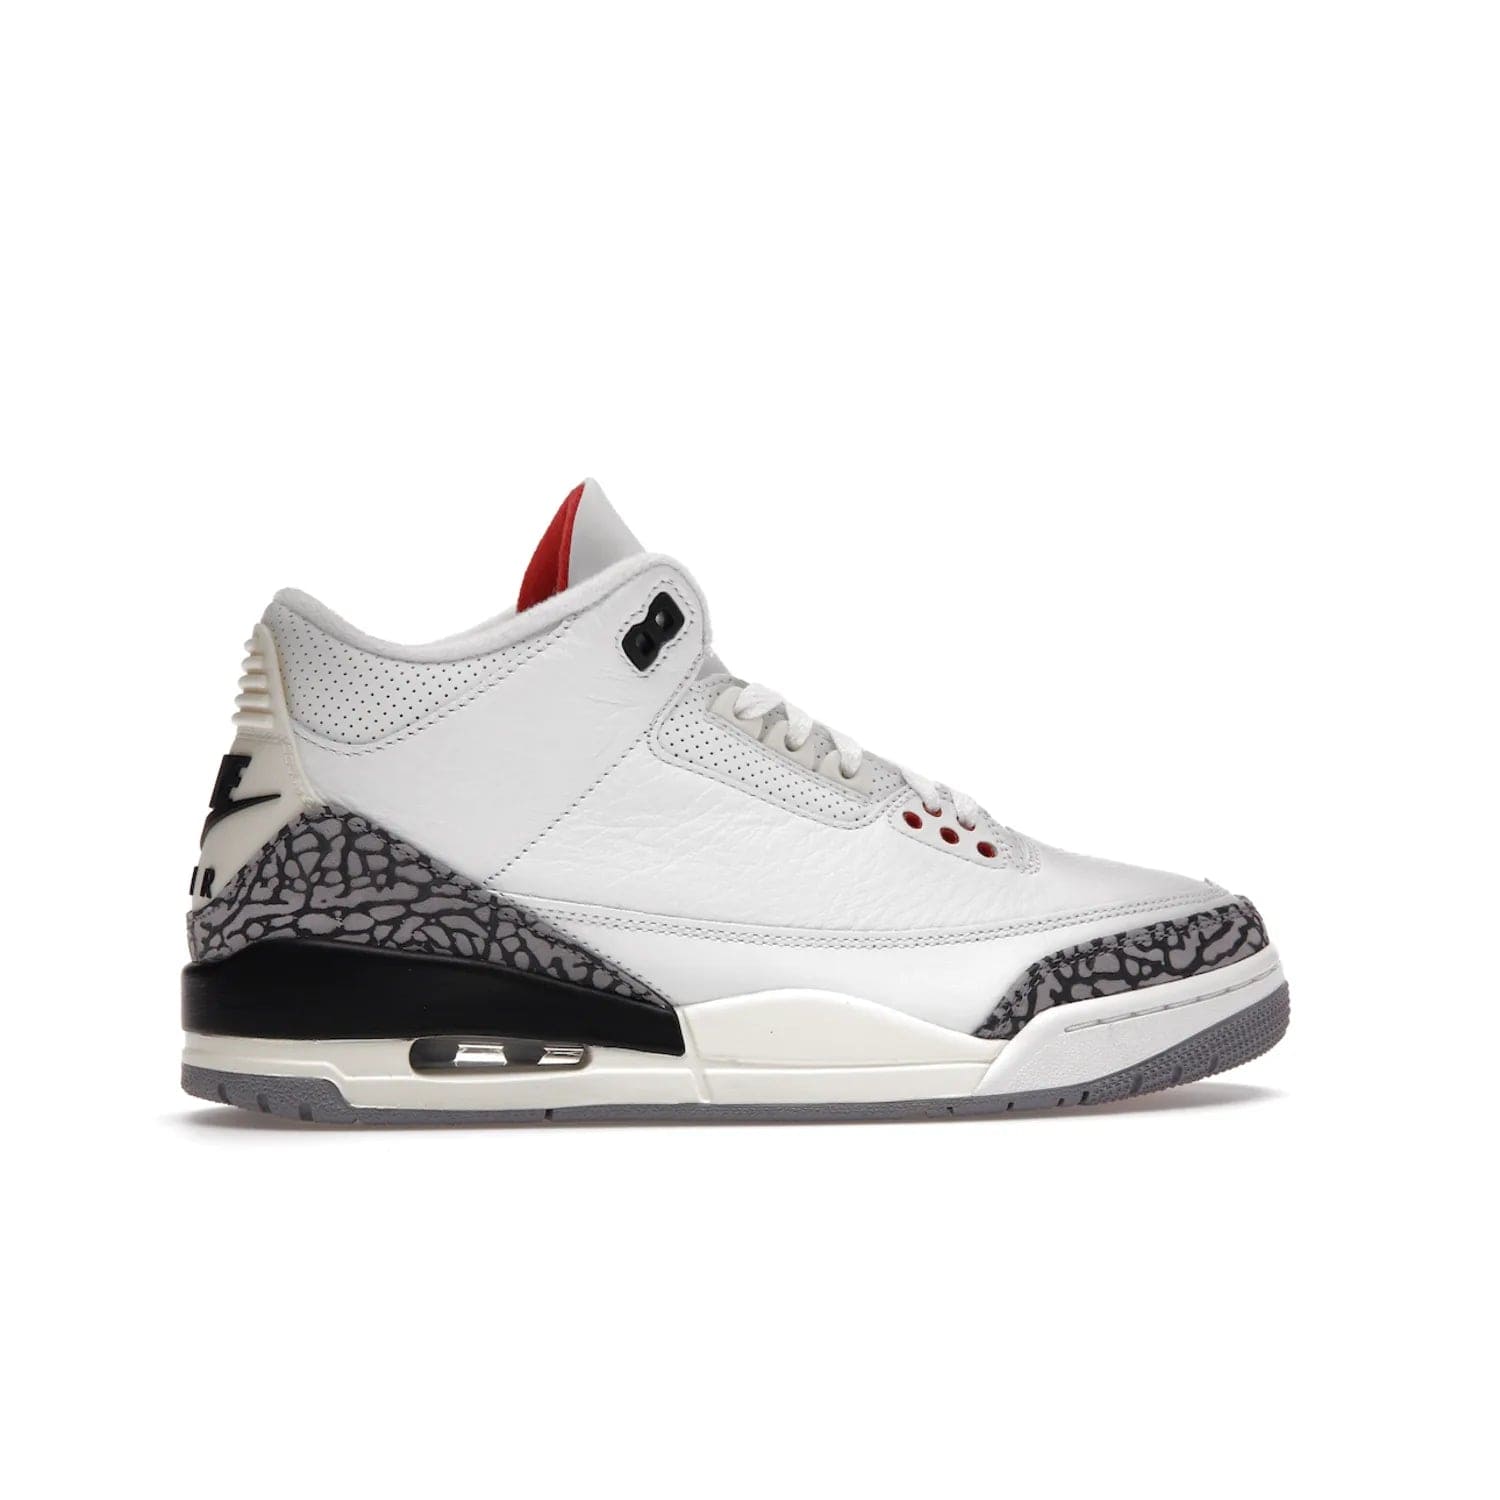 Jordan 3 Retro White Cement Reimagined - Image 36 - Only at www.BallersClubKickz.com - The Reimagined Air Jordan 3 Retro in a Summit White/Fire Red/Black/Cement Grey colorway is launching on March 11, 2023. Featuring a white leather upper, off-white midsoles and heel tabs, this vintage-look sneaker is a must-have.